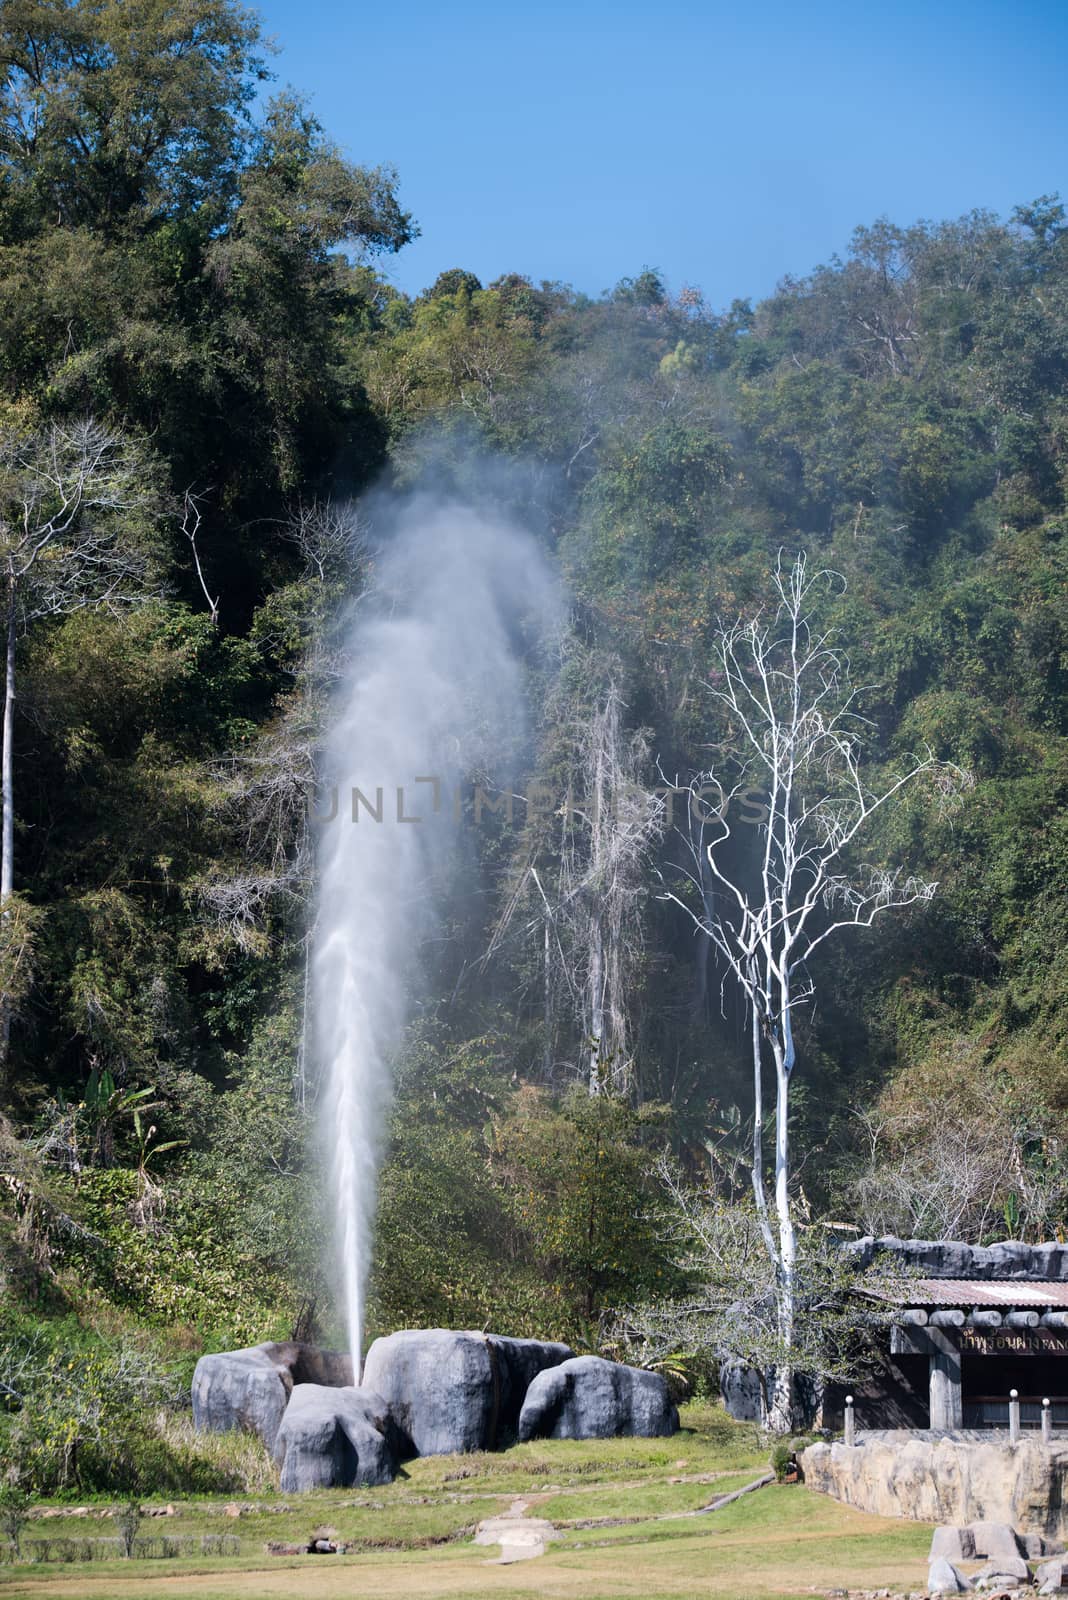 fang Hot Spring National Park is part of Doi Pha Hom Pok National Park in Chiang Mai, Thailand